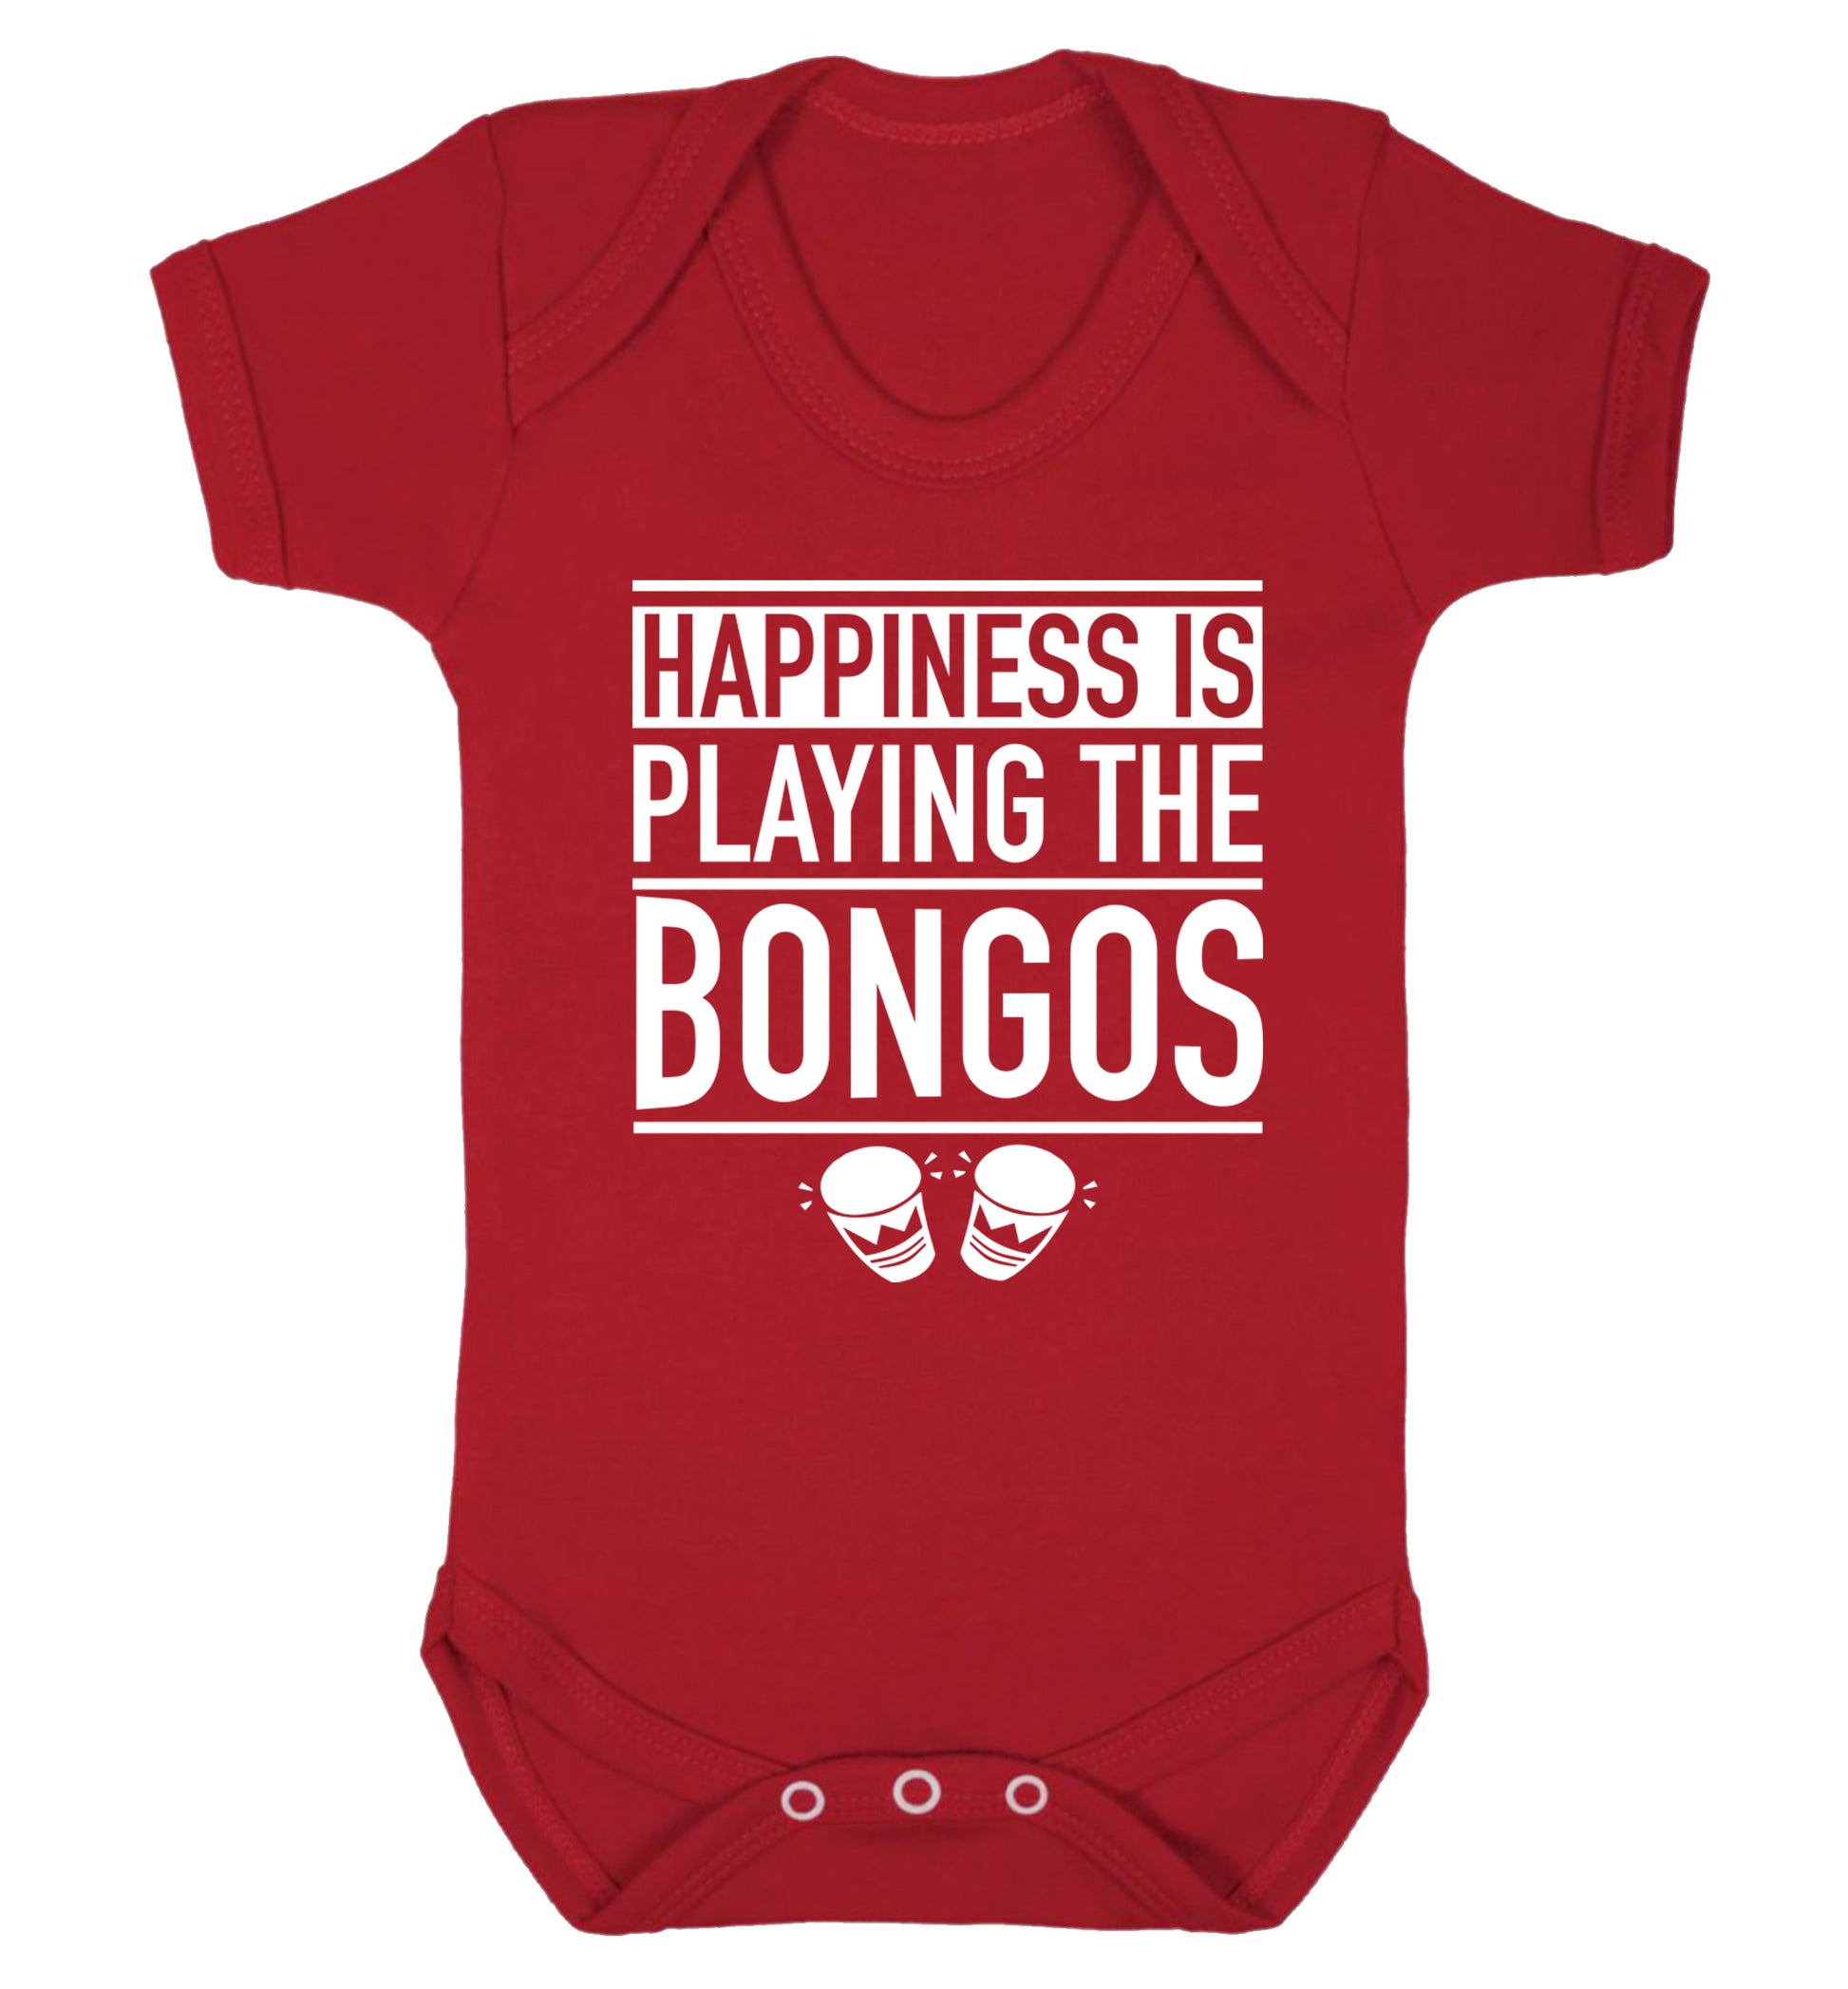 Happiness is playing the bongos Baby Vest red 18-24 months